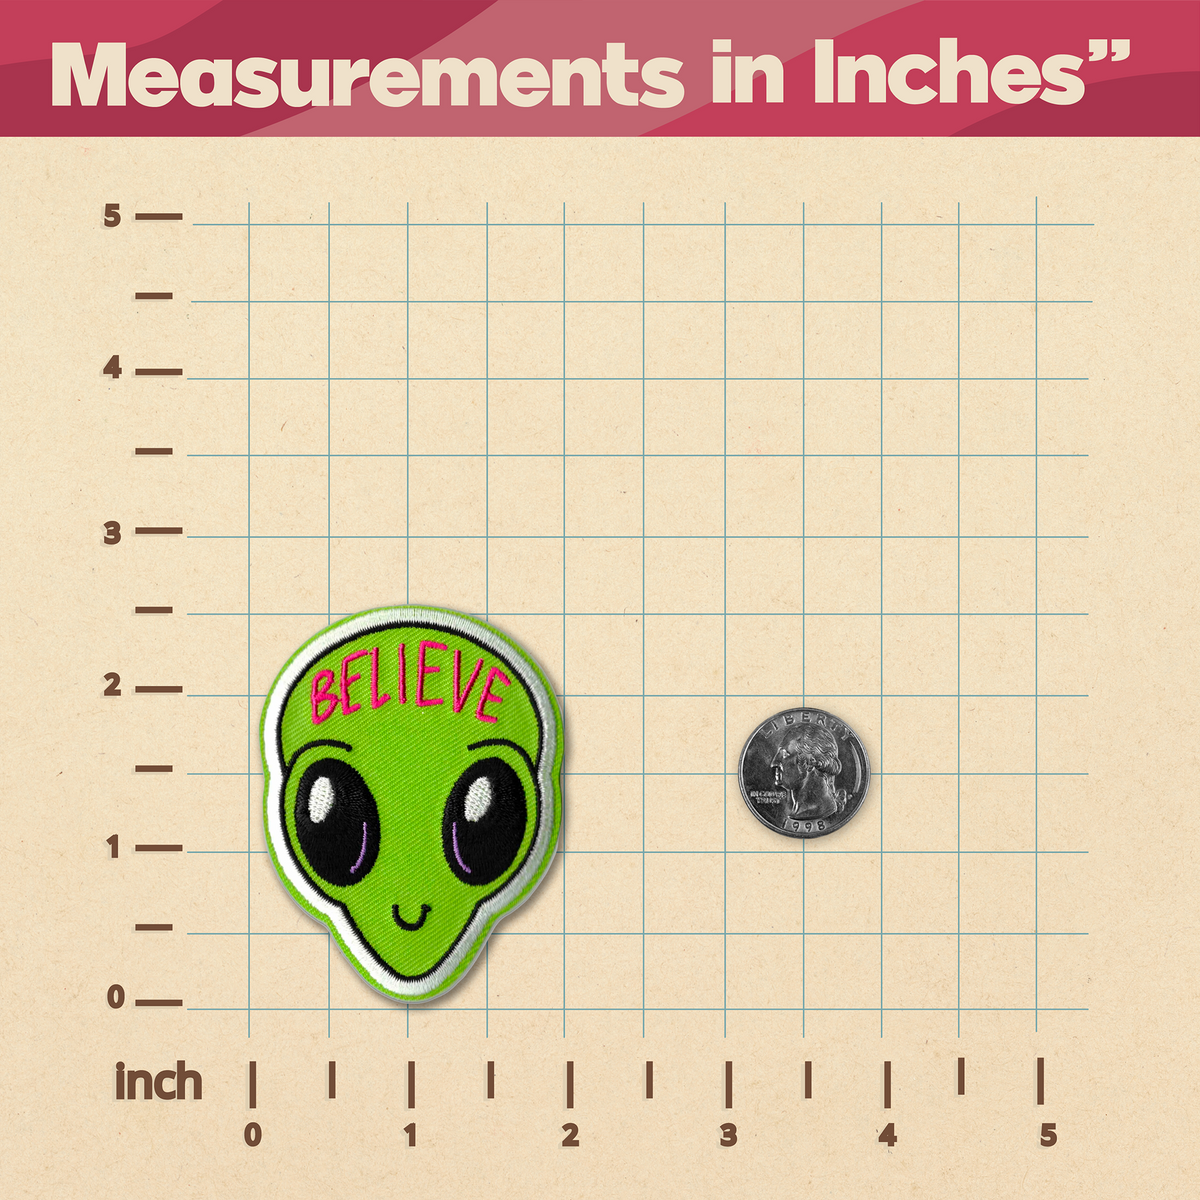 A ruler with a Believe Alien Patch from KosmicSoul sewn on it and a coin glued on it.